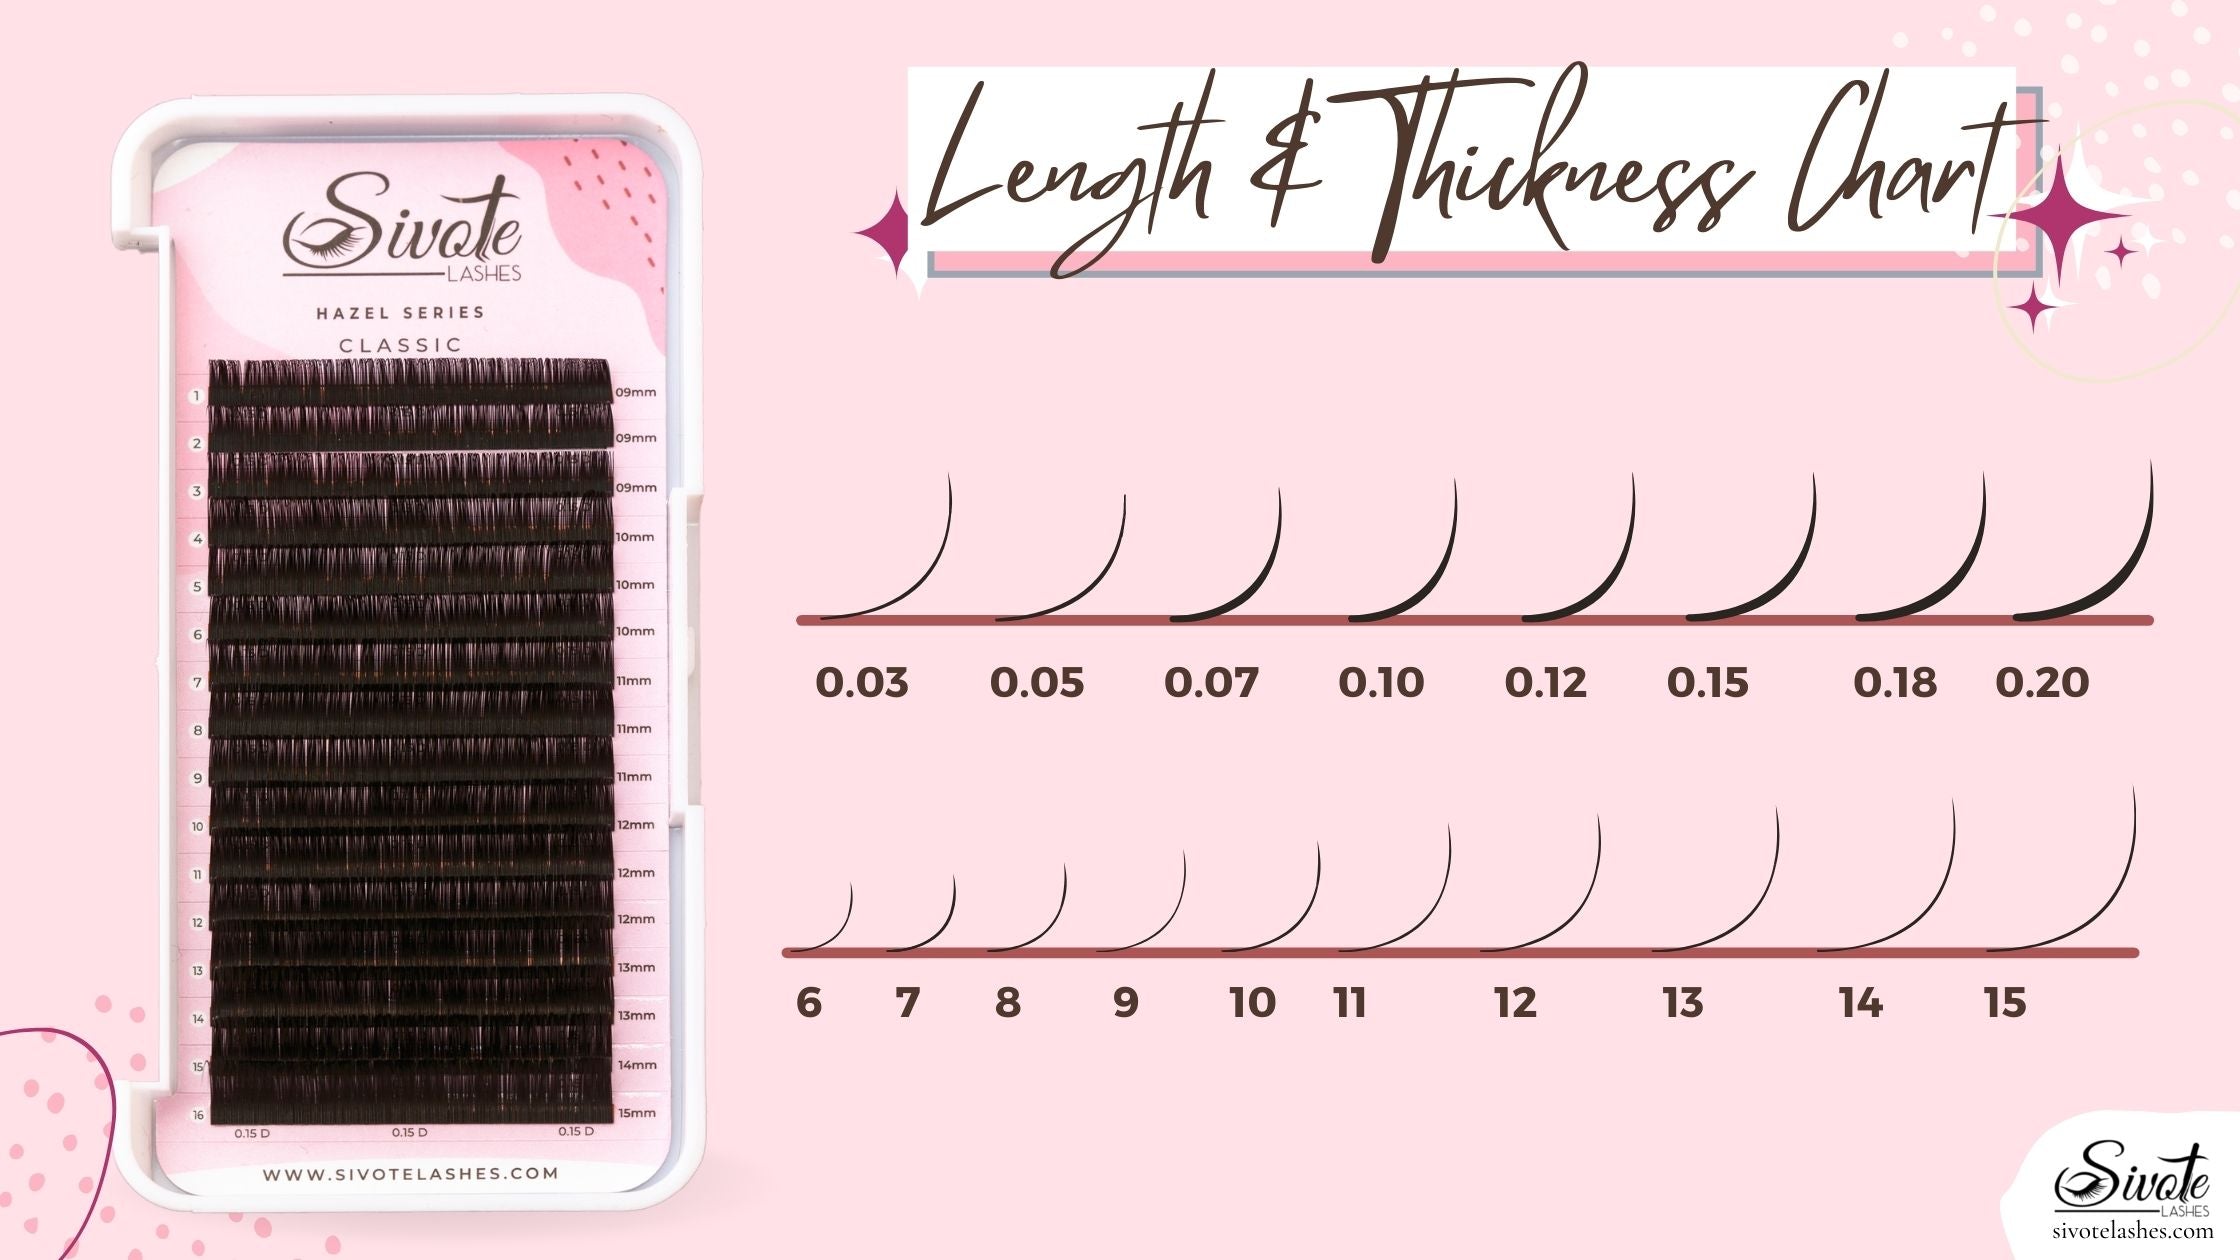 Length and thickness chart of lash extensions